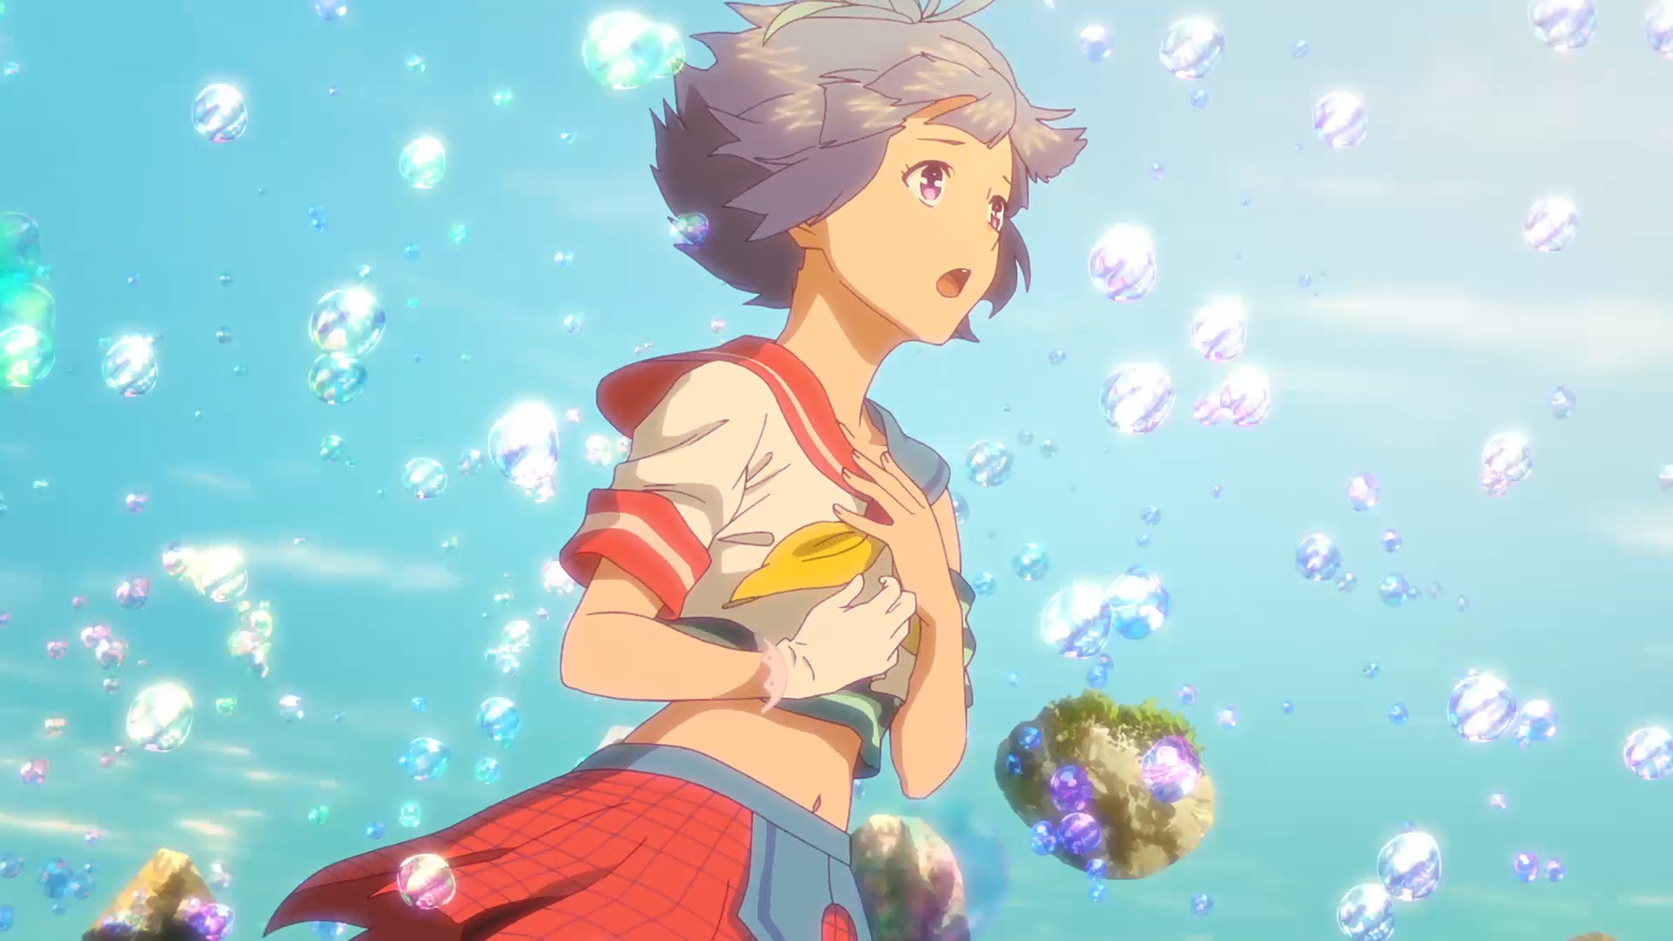 Bubble (Review) – Beautiful but Shallow – The Anime View